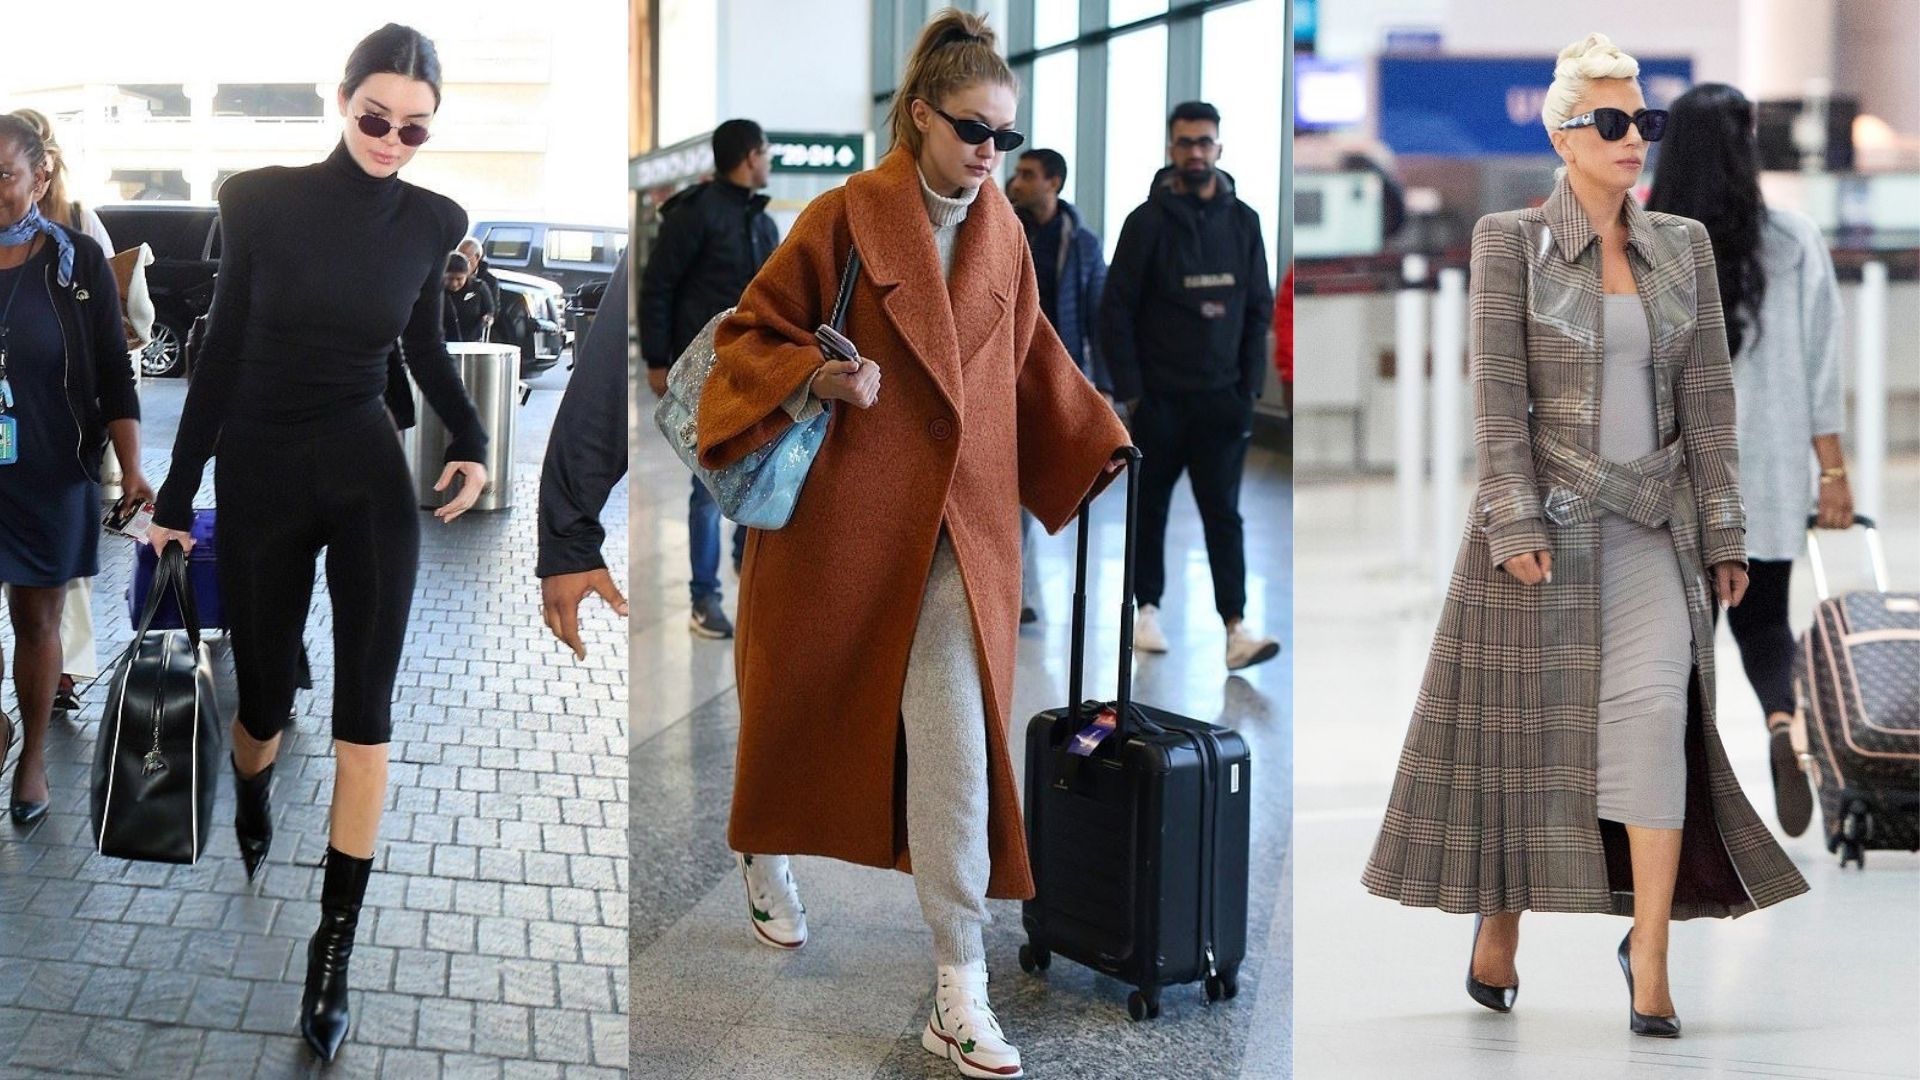 26 Fashionable Airport Outfit Ideas for Women - Celebrity Travel Looks